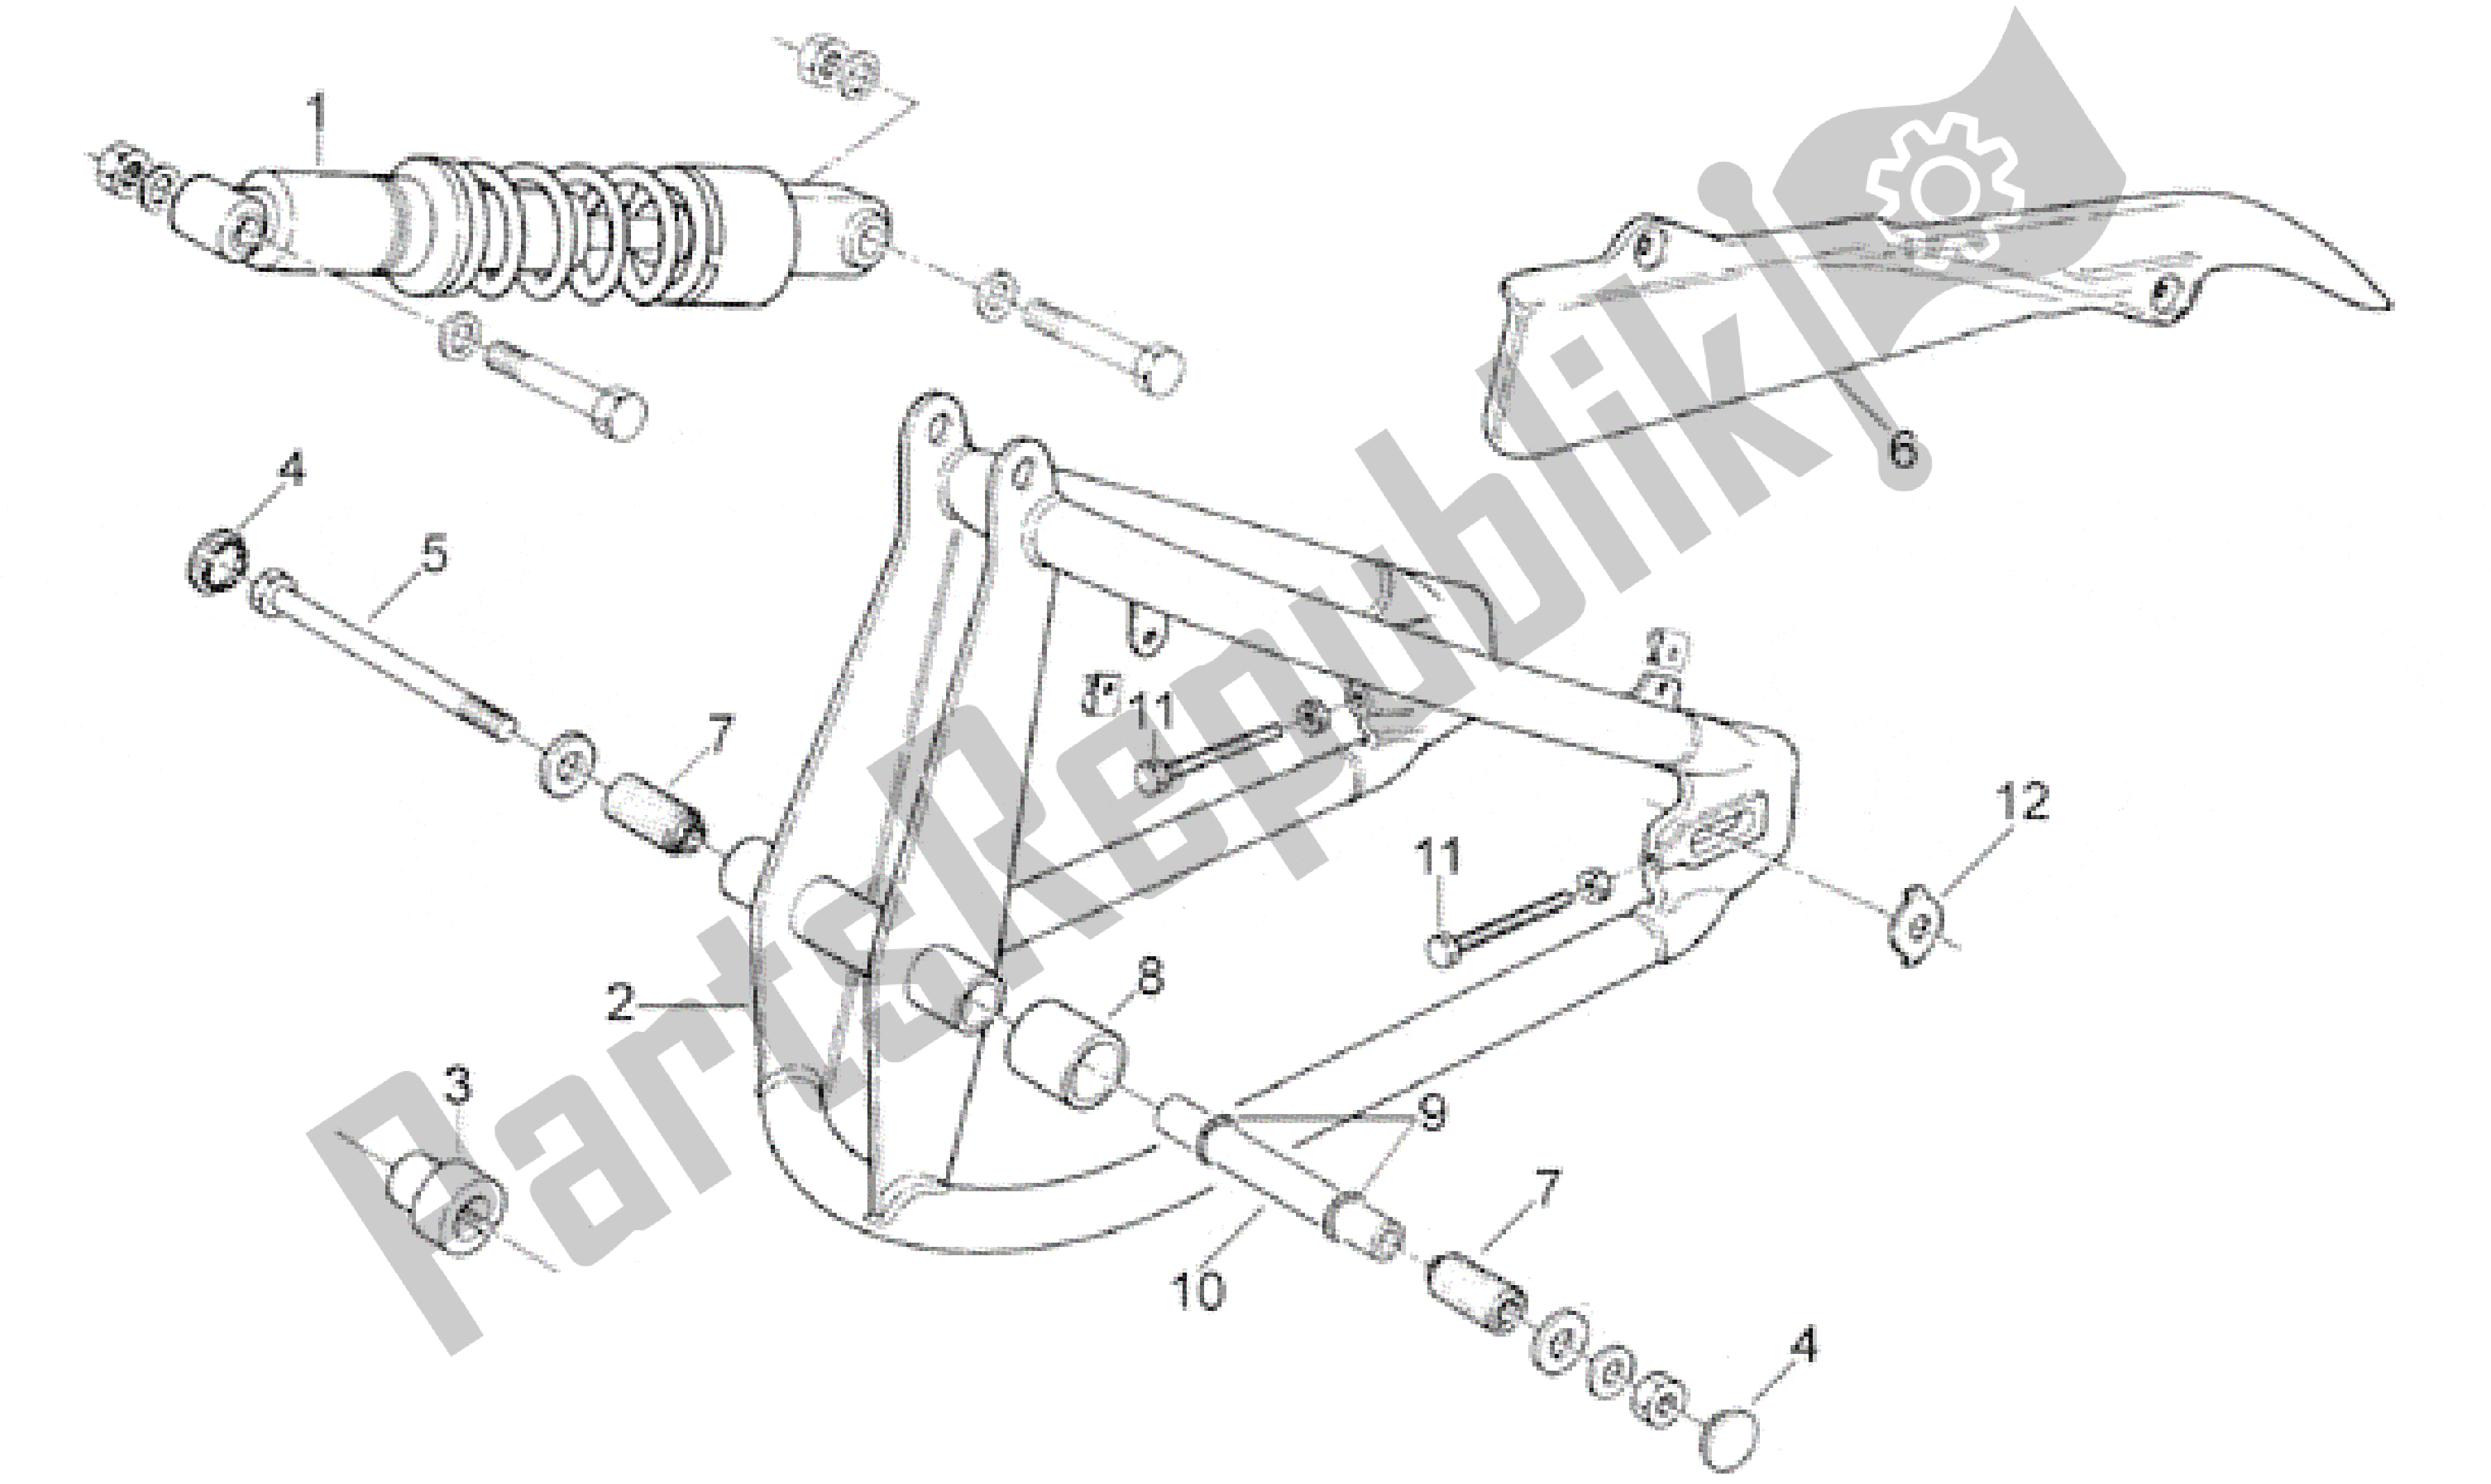 All parts for the Swing Arm - Shock Absorber of the Aprilia Classic 50 1992 - 1999